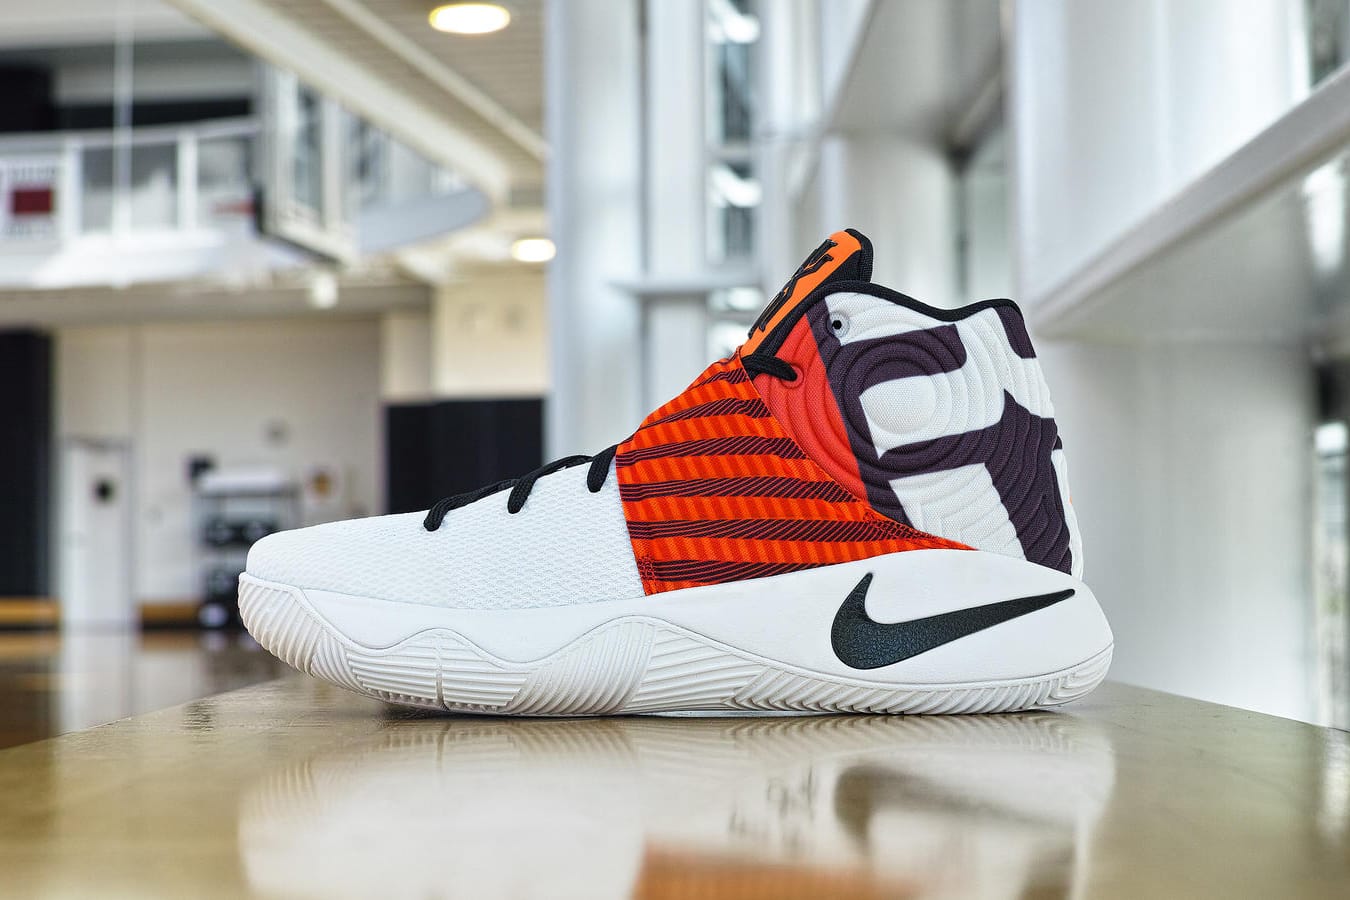 kyrie irving playoff shoes